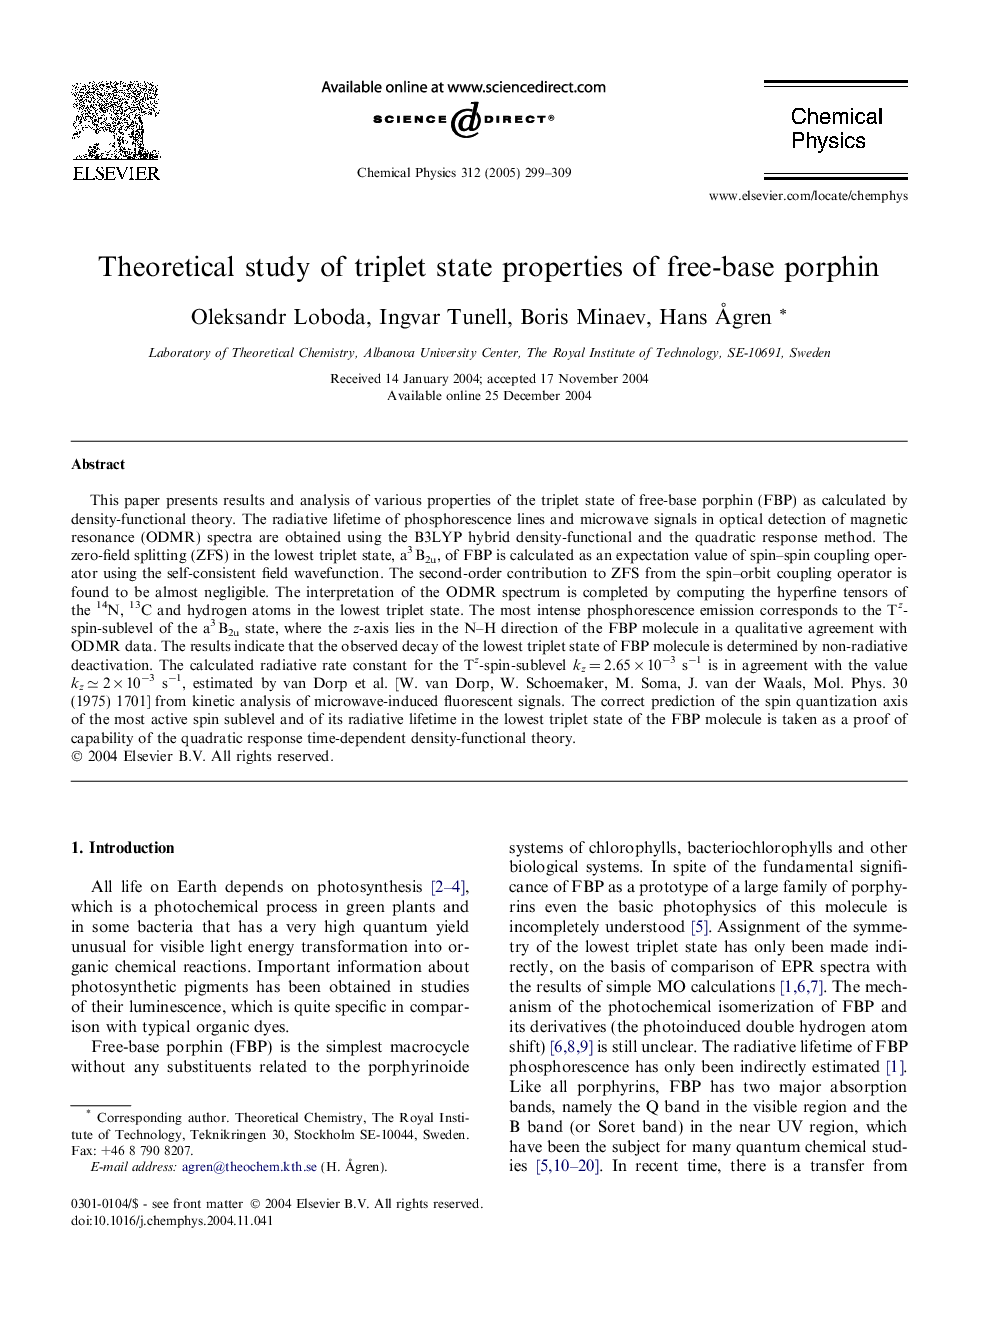 Theoretical study of triplet state properties of free-base porphin